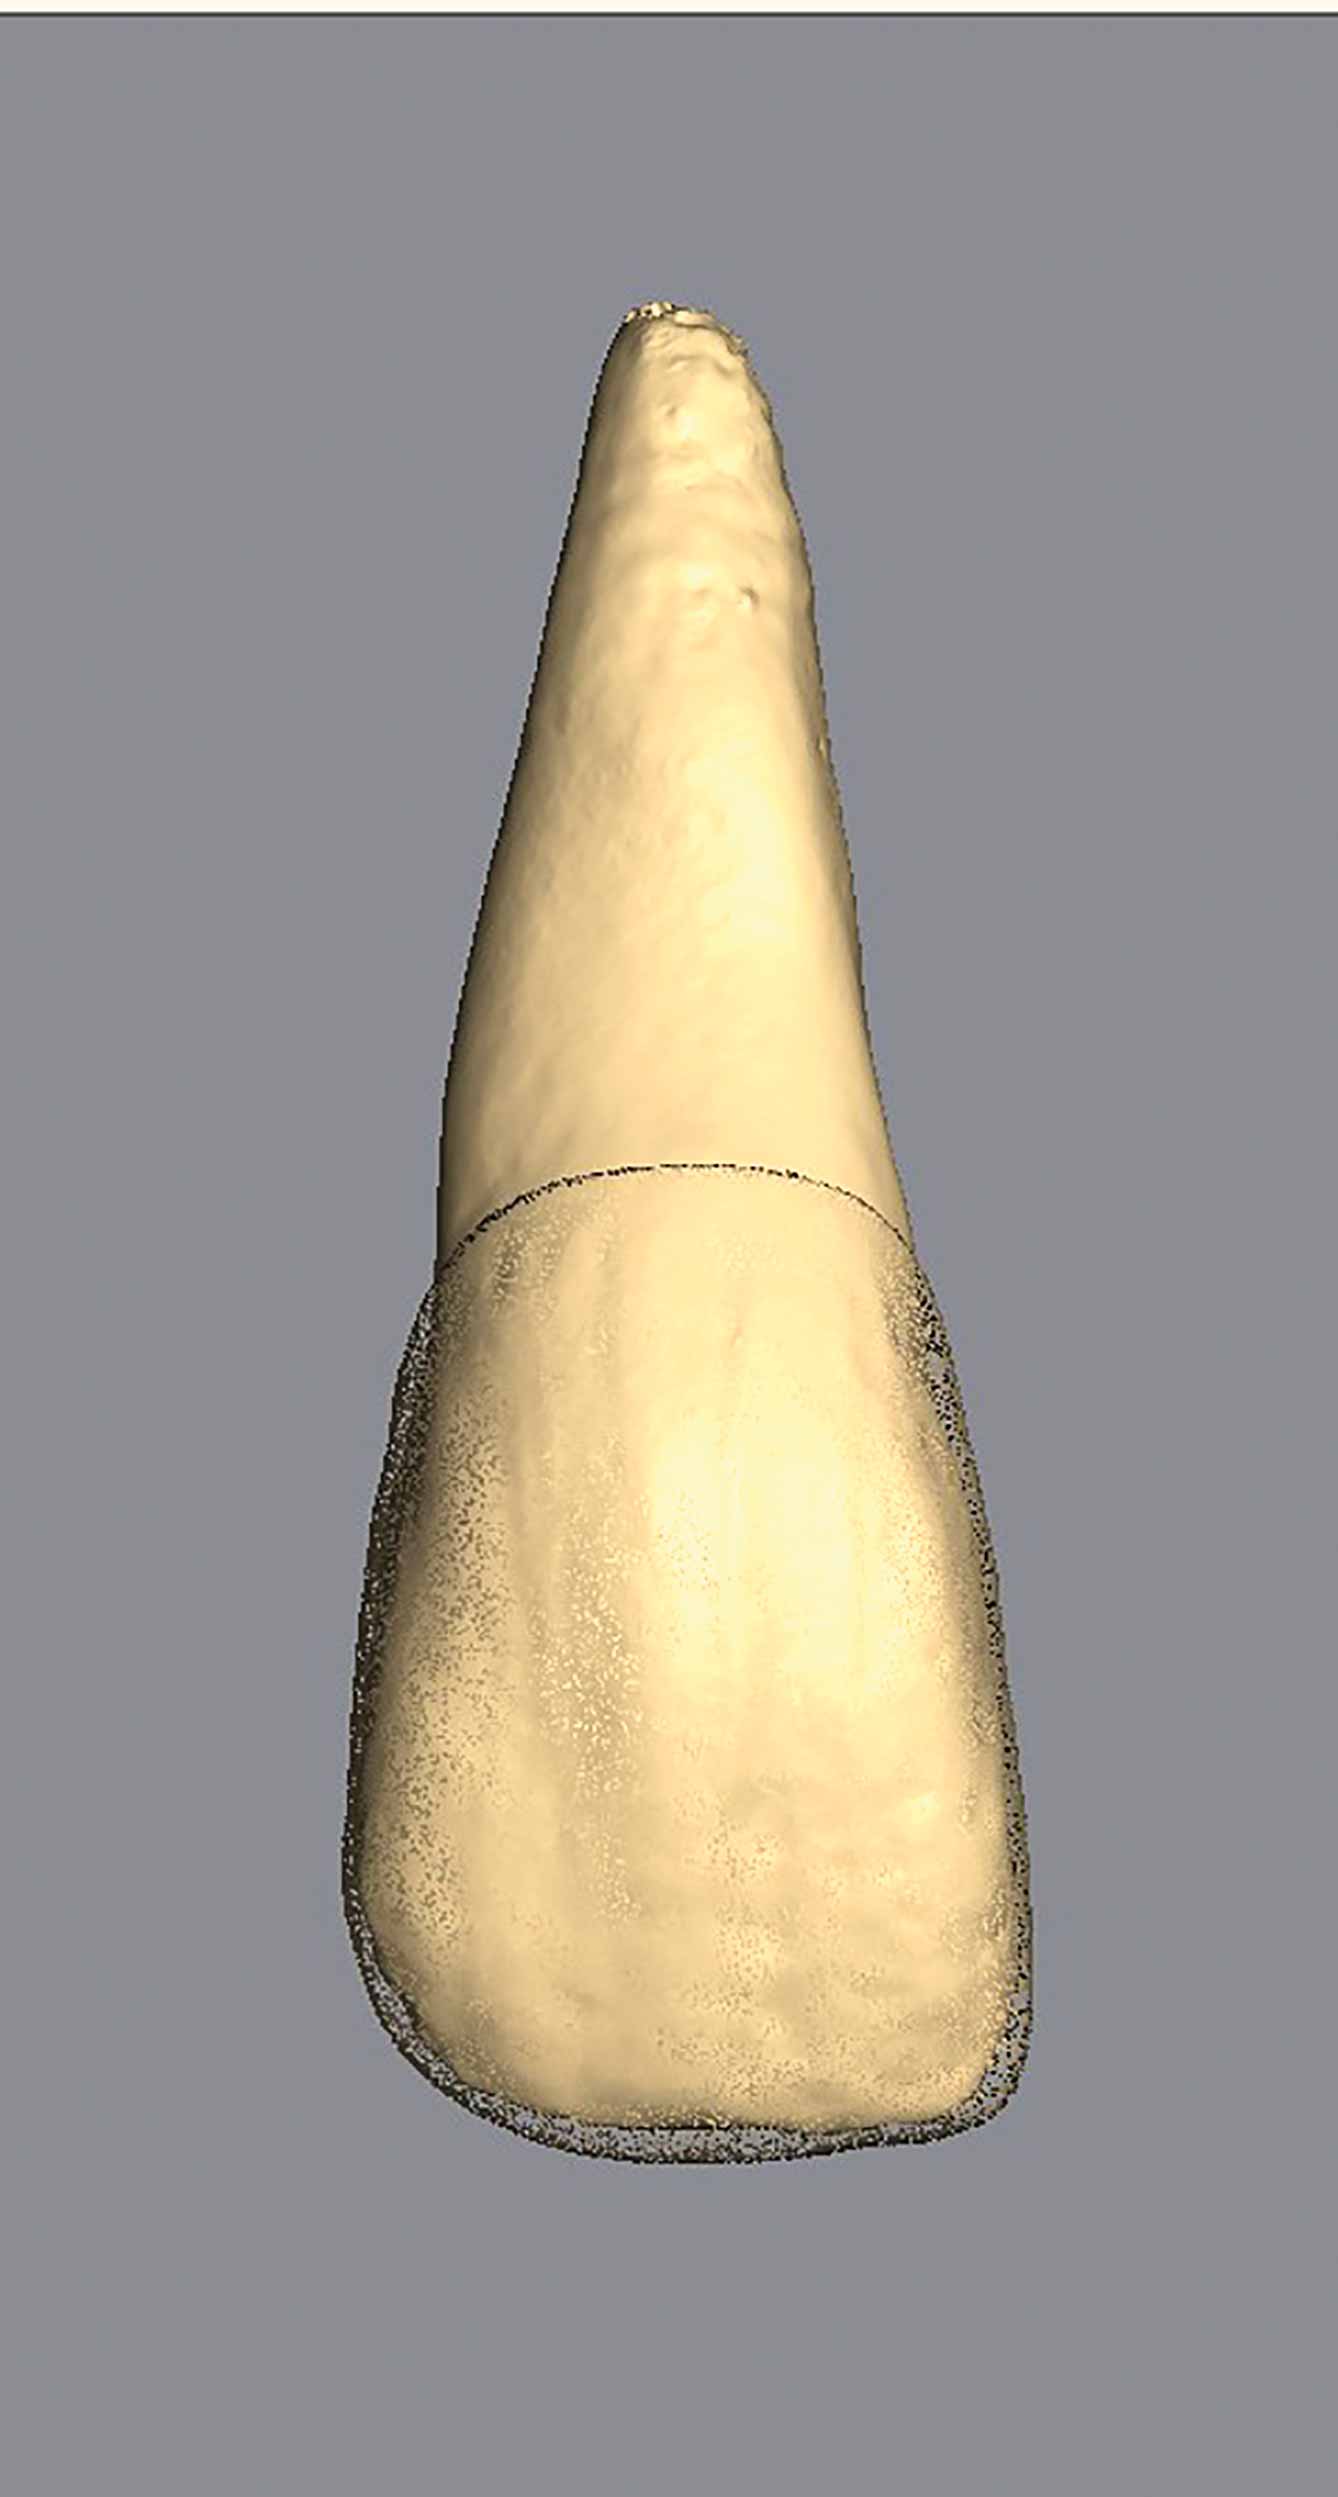 A real extracted tooth modelled for Vitapan to create dental prosthetics